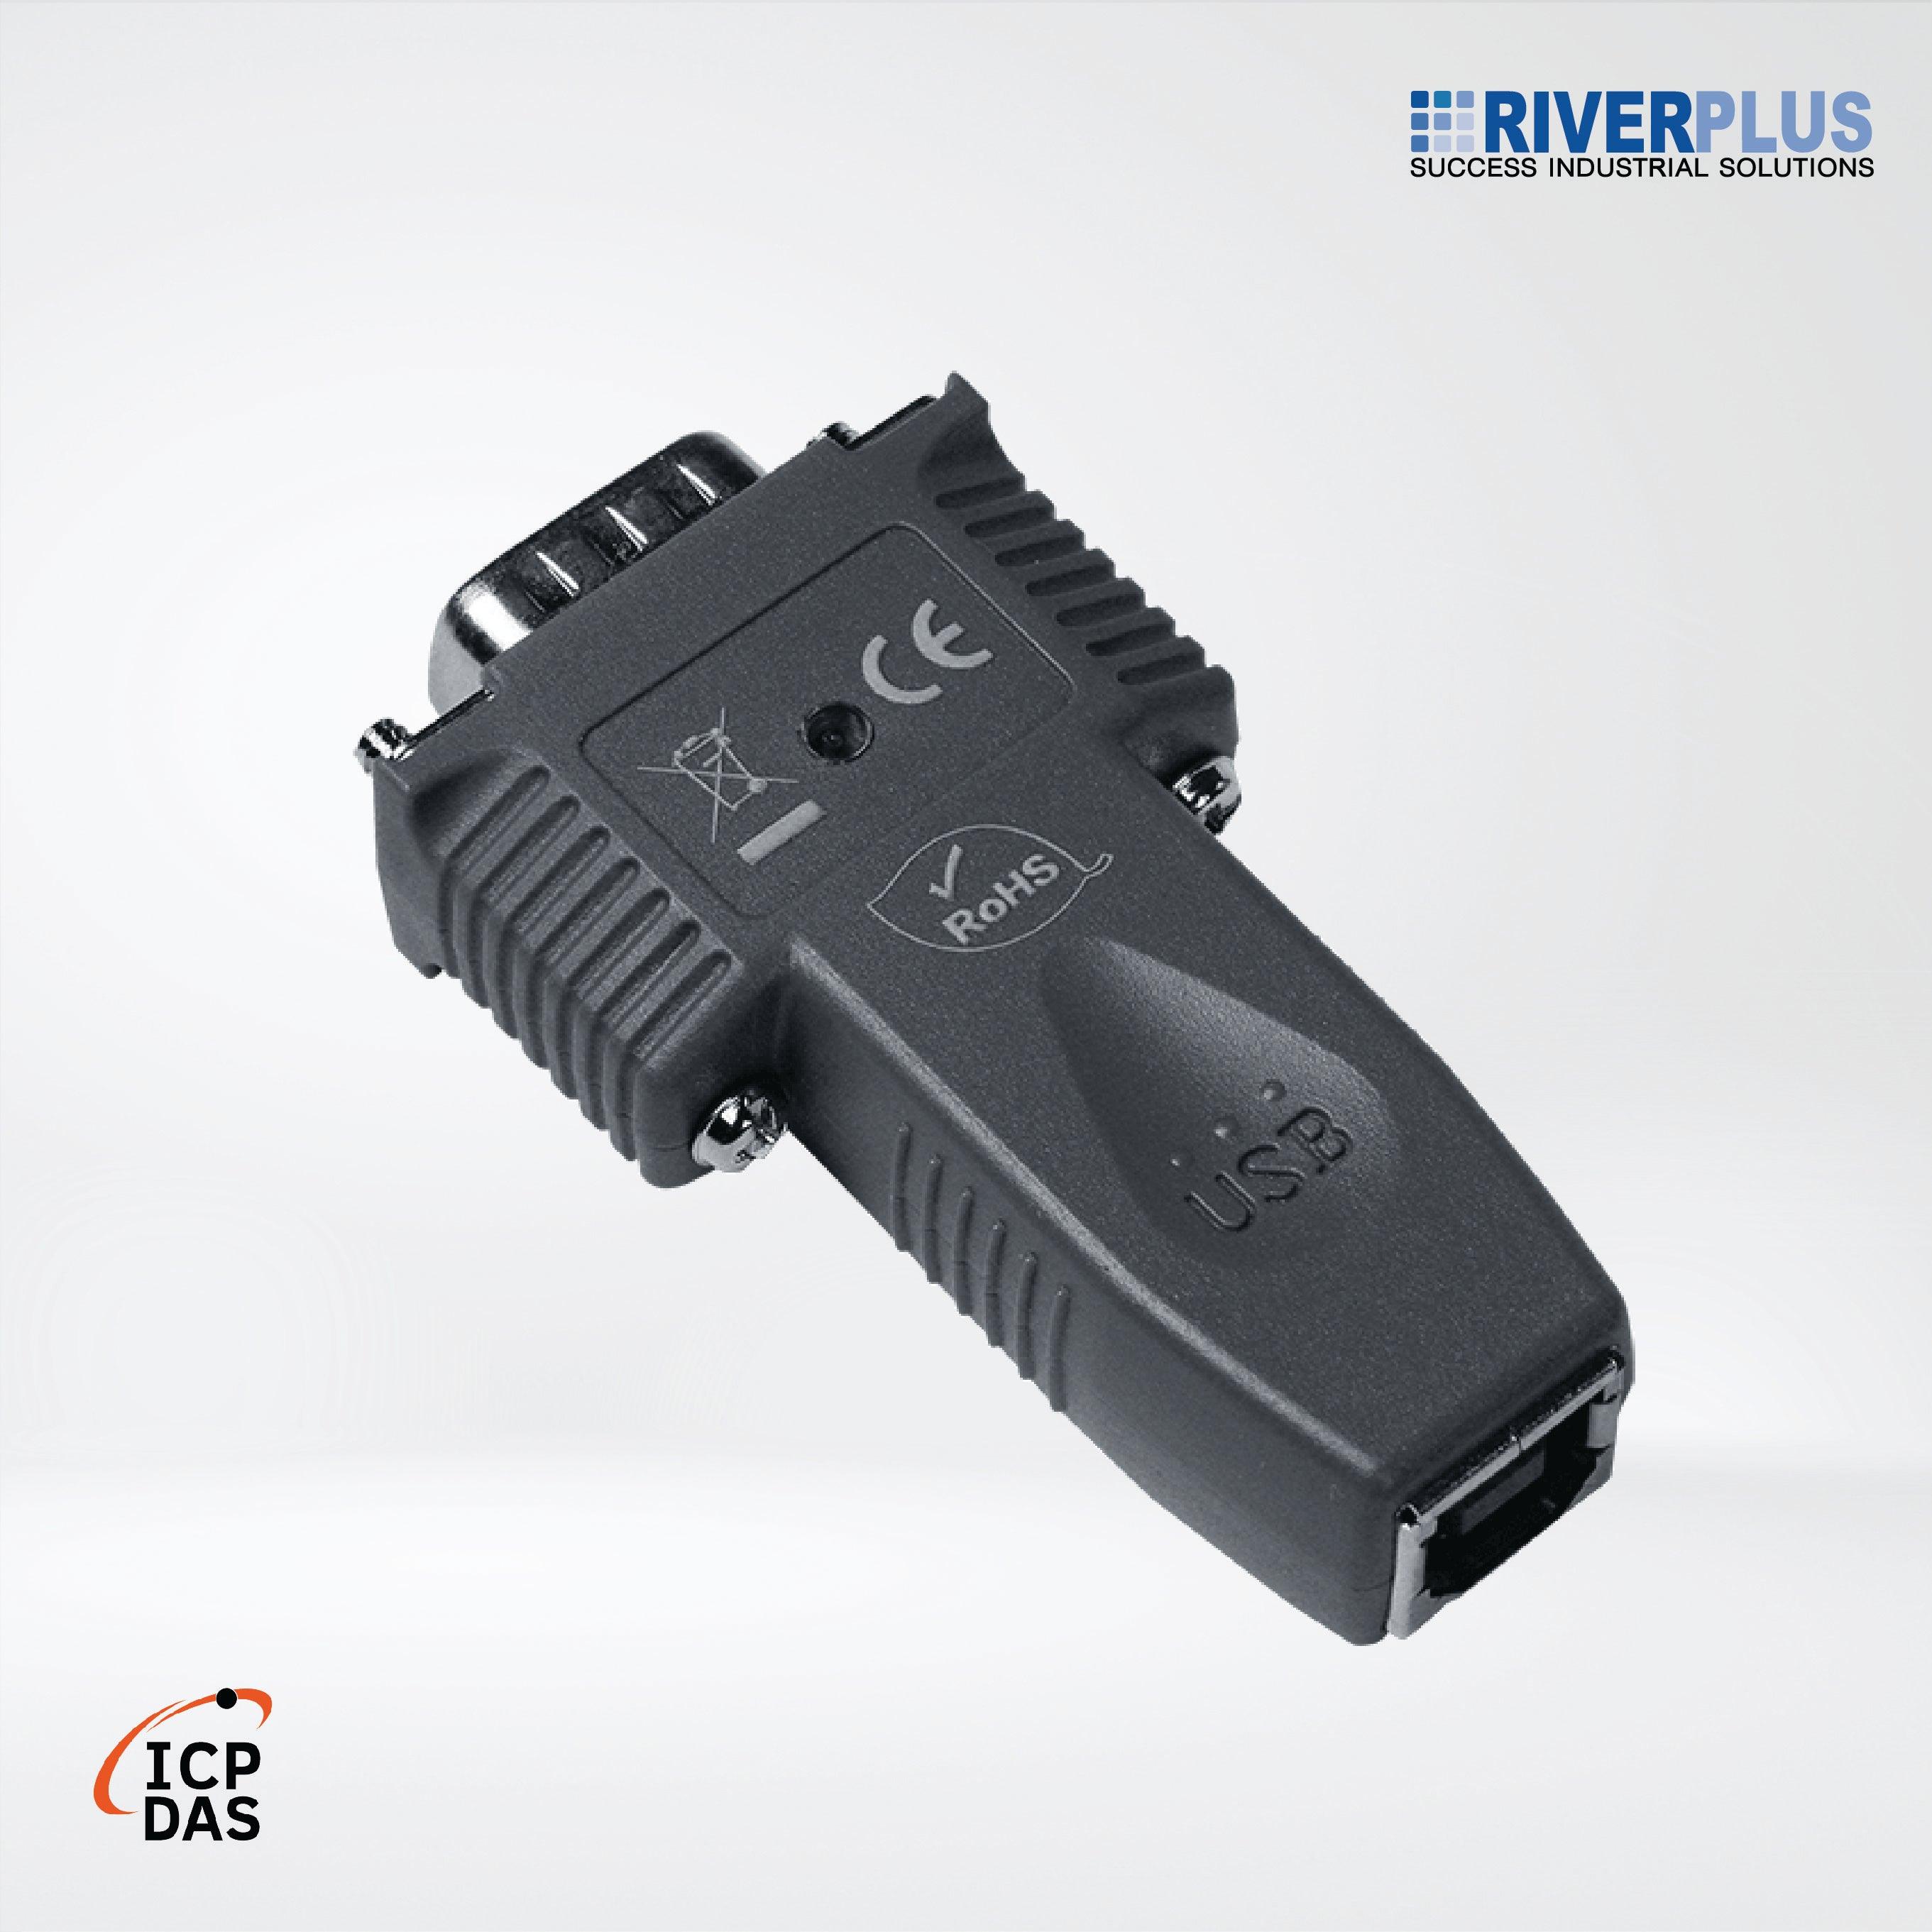 I-7560U High-speed USB to RS-232 Converter with CA-USB18 Cable (Windows 8/8.1) - Riverplus